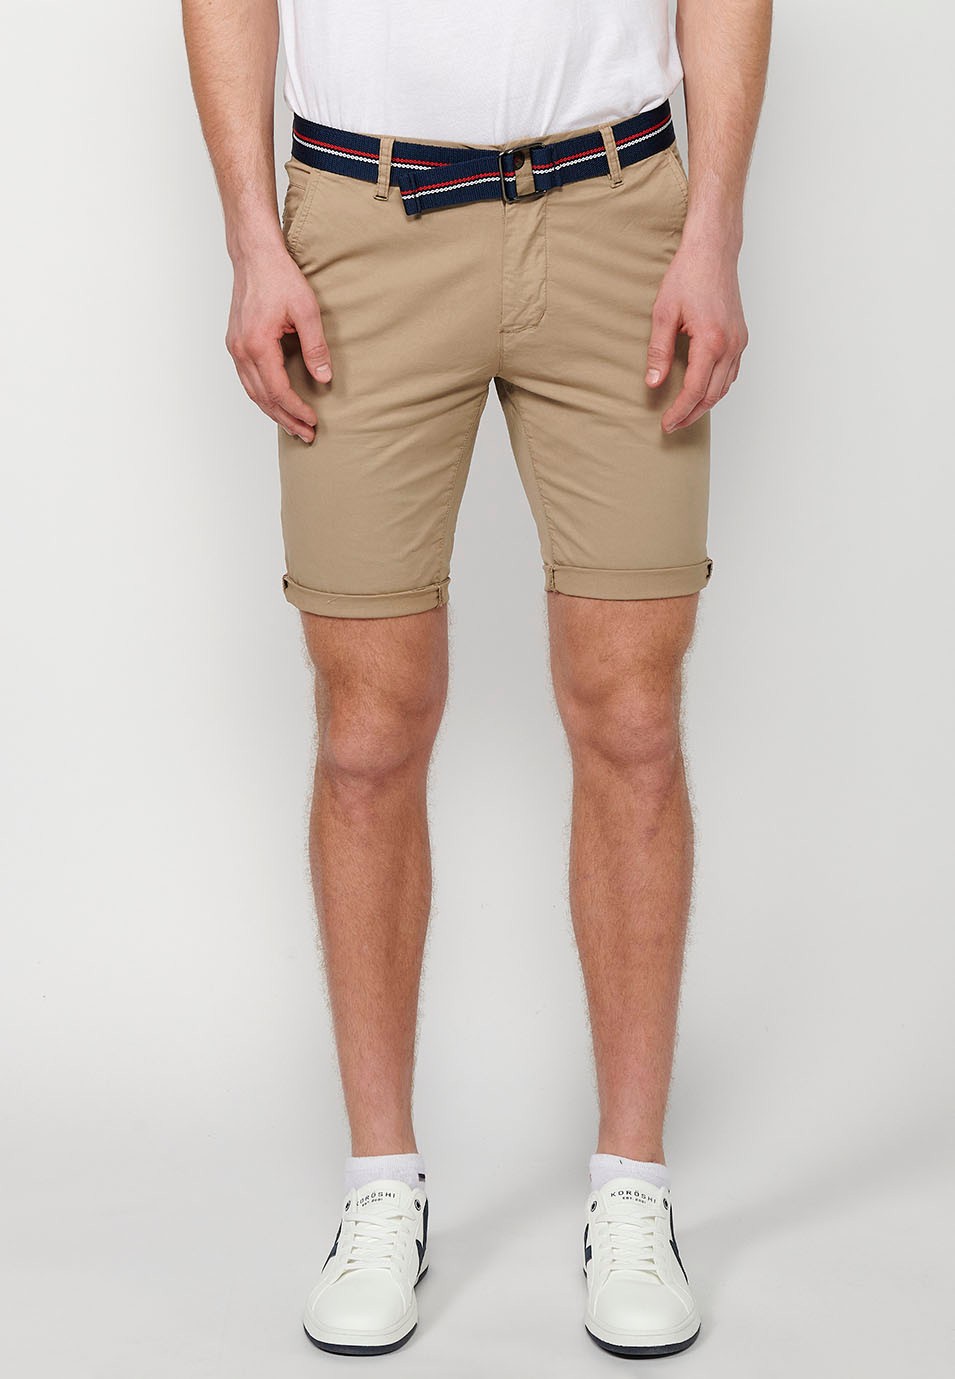 Shorts with a turn-up finish with front closure with zipper and button and belt in Beige Color for Men 2